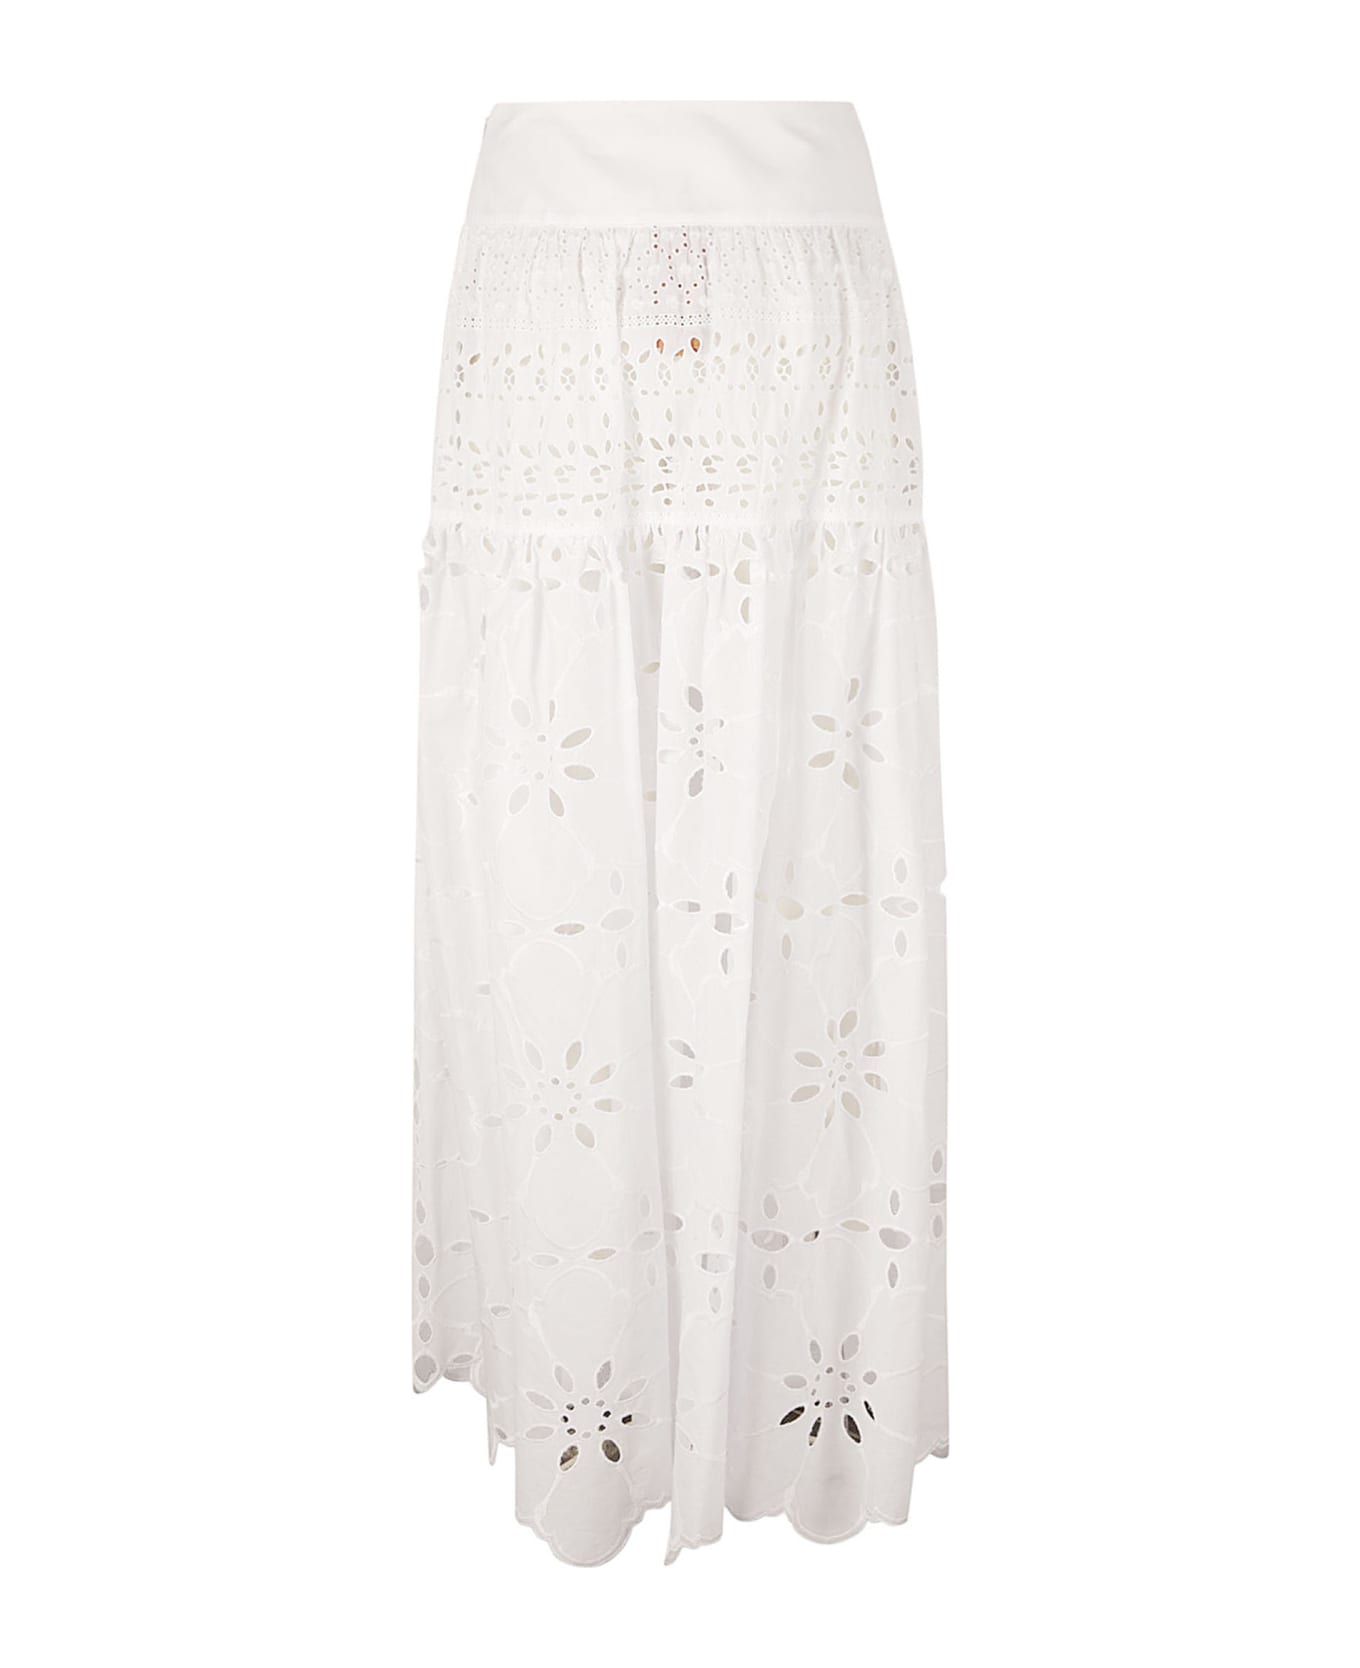 Ermanno Scervino High-waist Floral Perforated Skirt - White